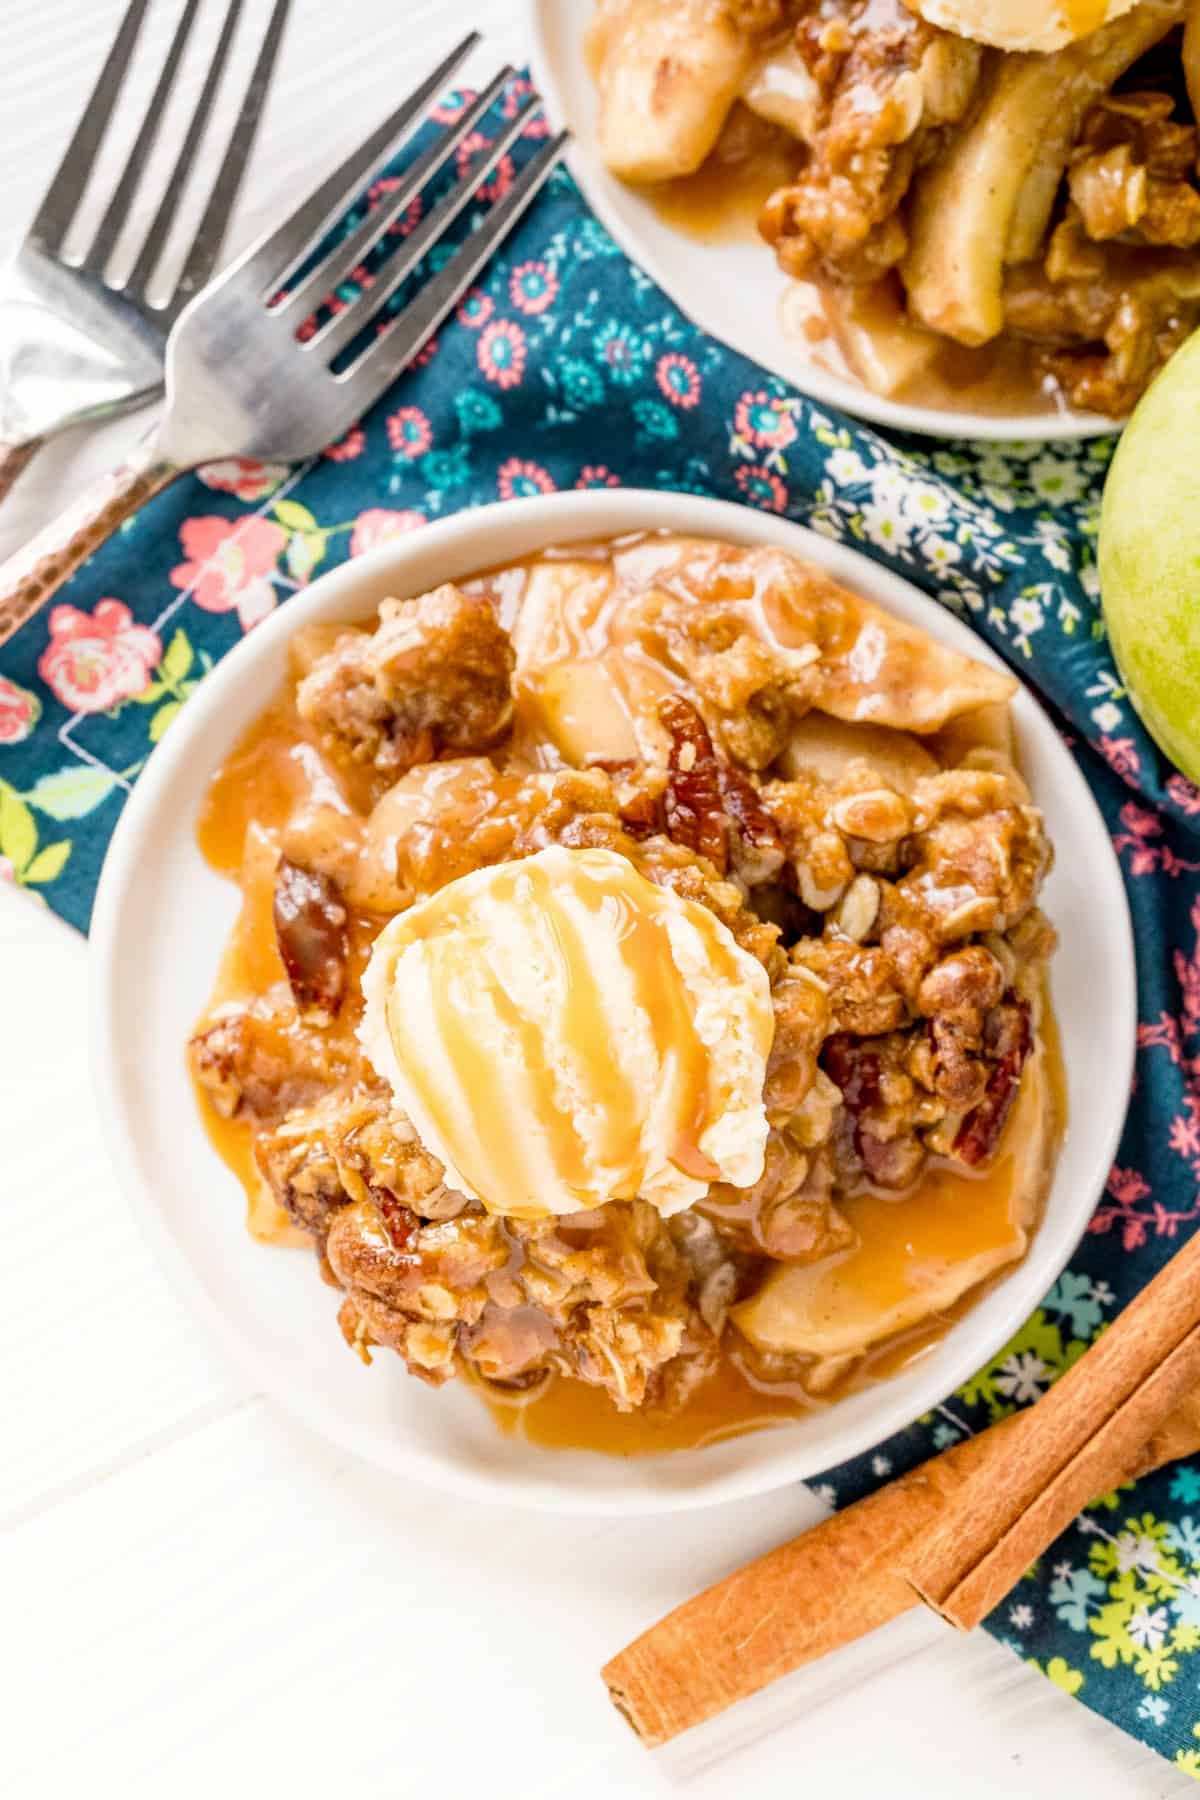 Overhead view of apple crisp on a plate with ice cream.